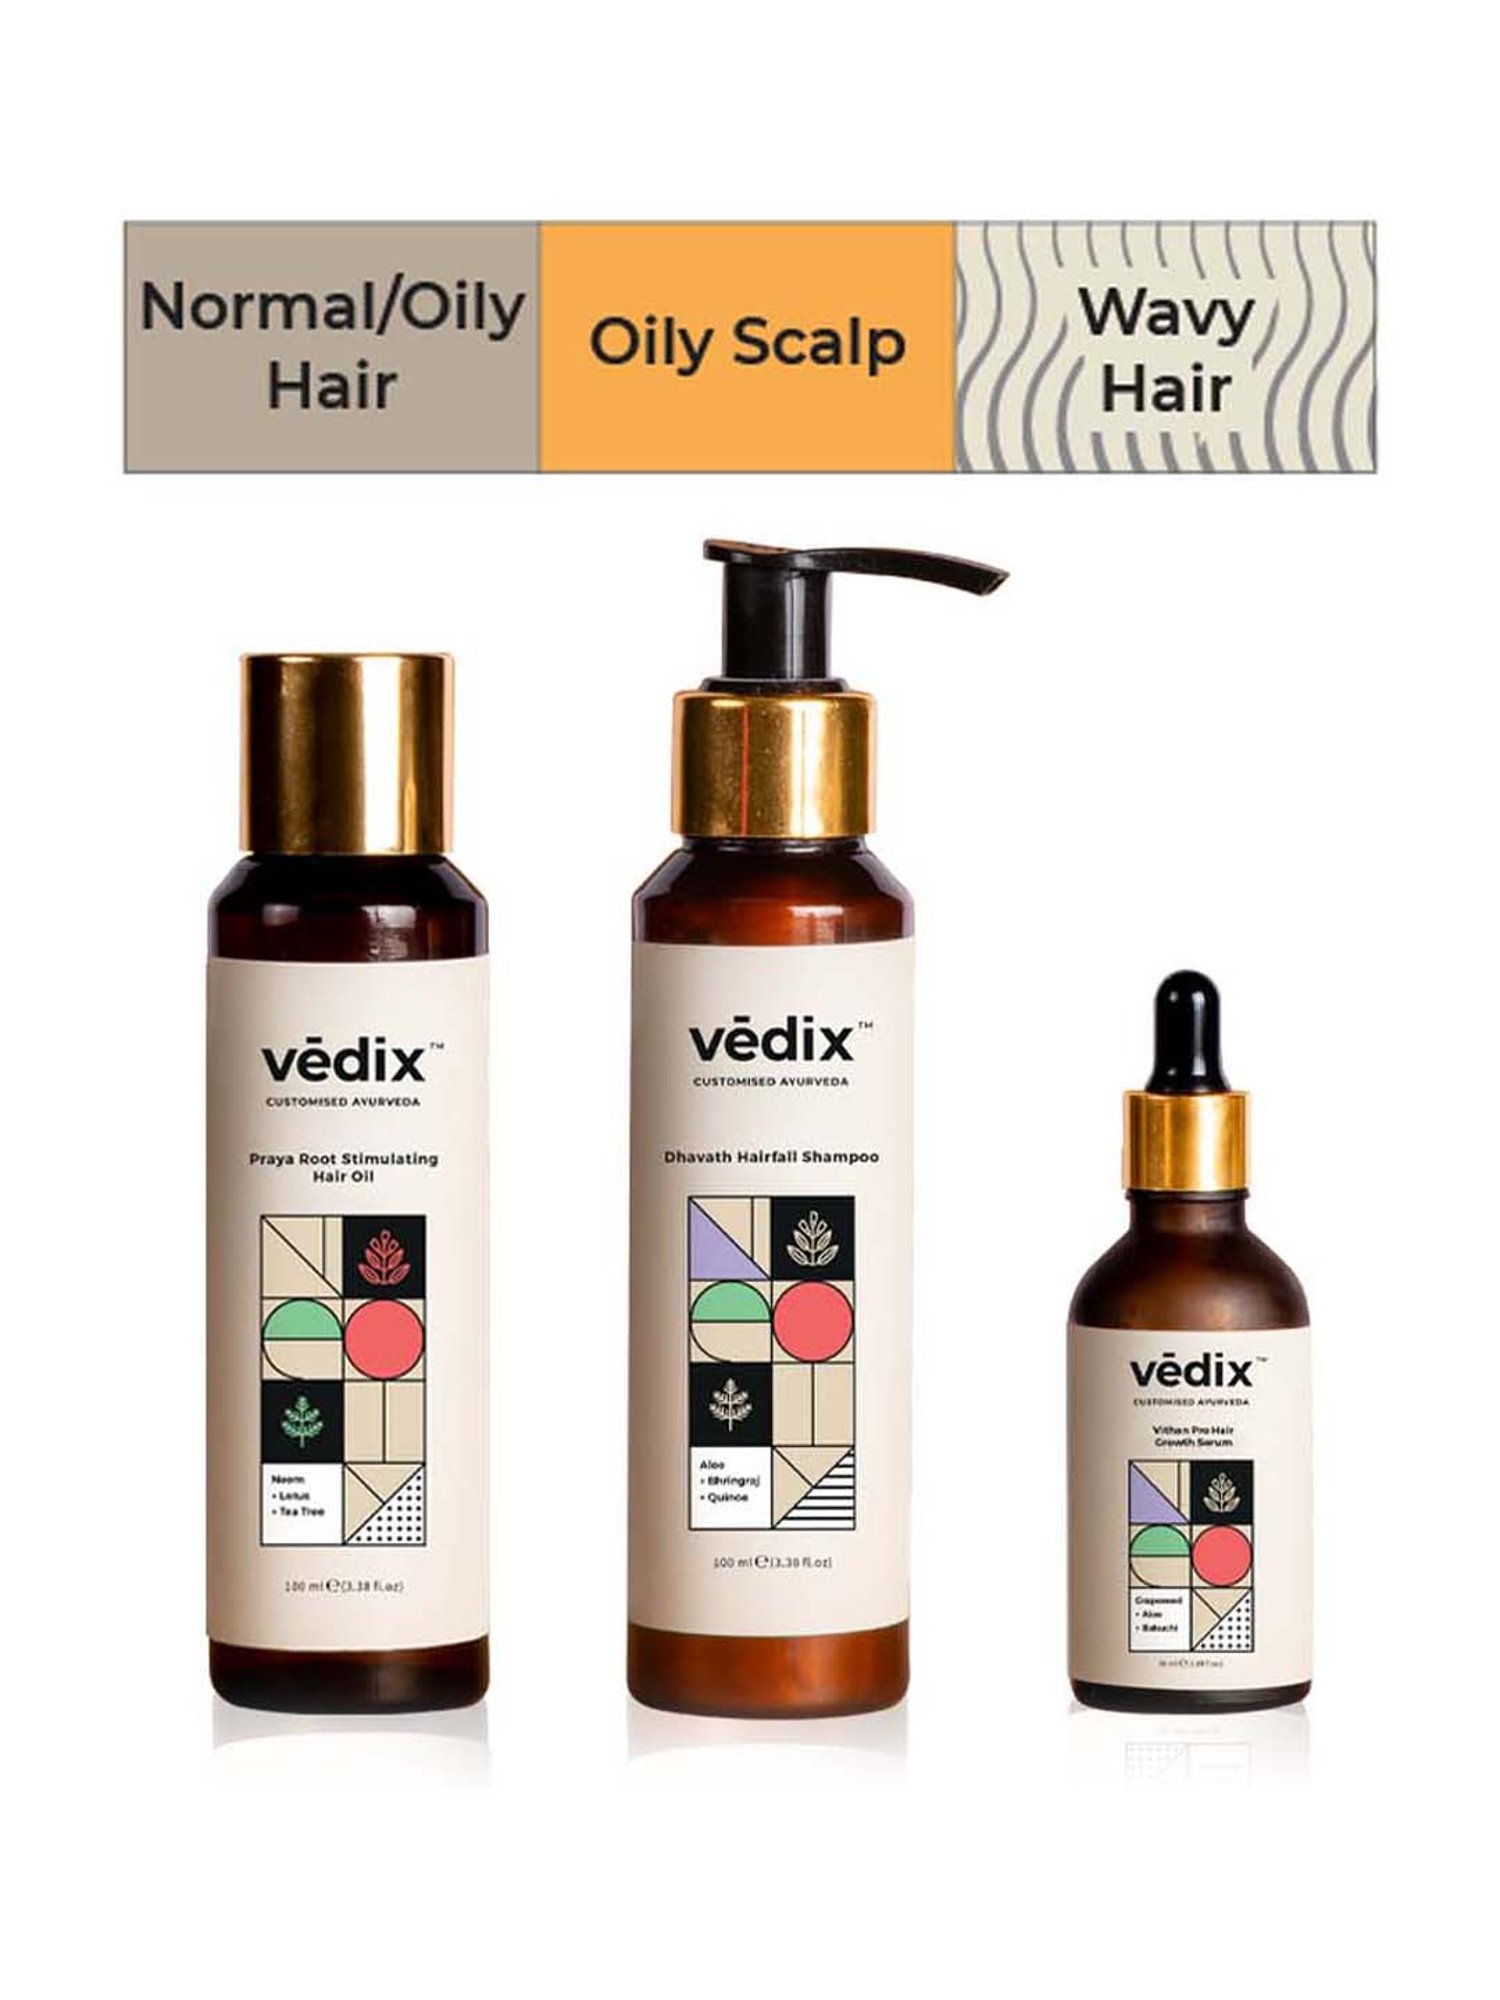 I Tried VEDIX Products  My Honest Review  Indias First Customized  Ayurvedic Hair Care Products  on Vimeo